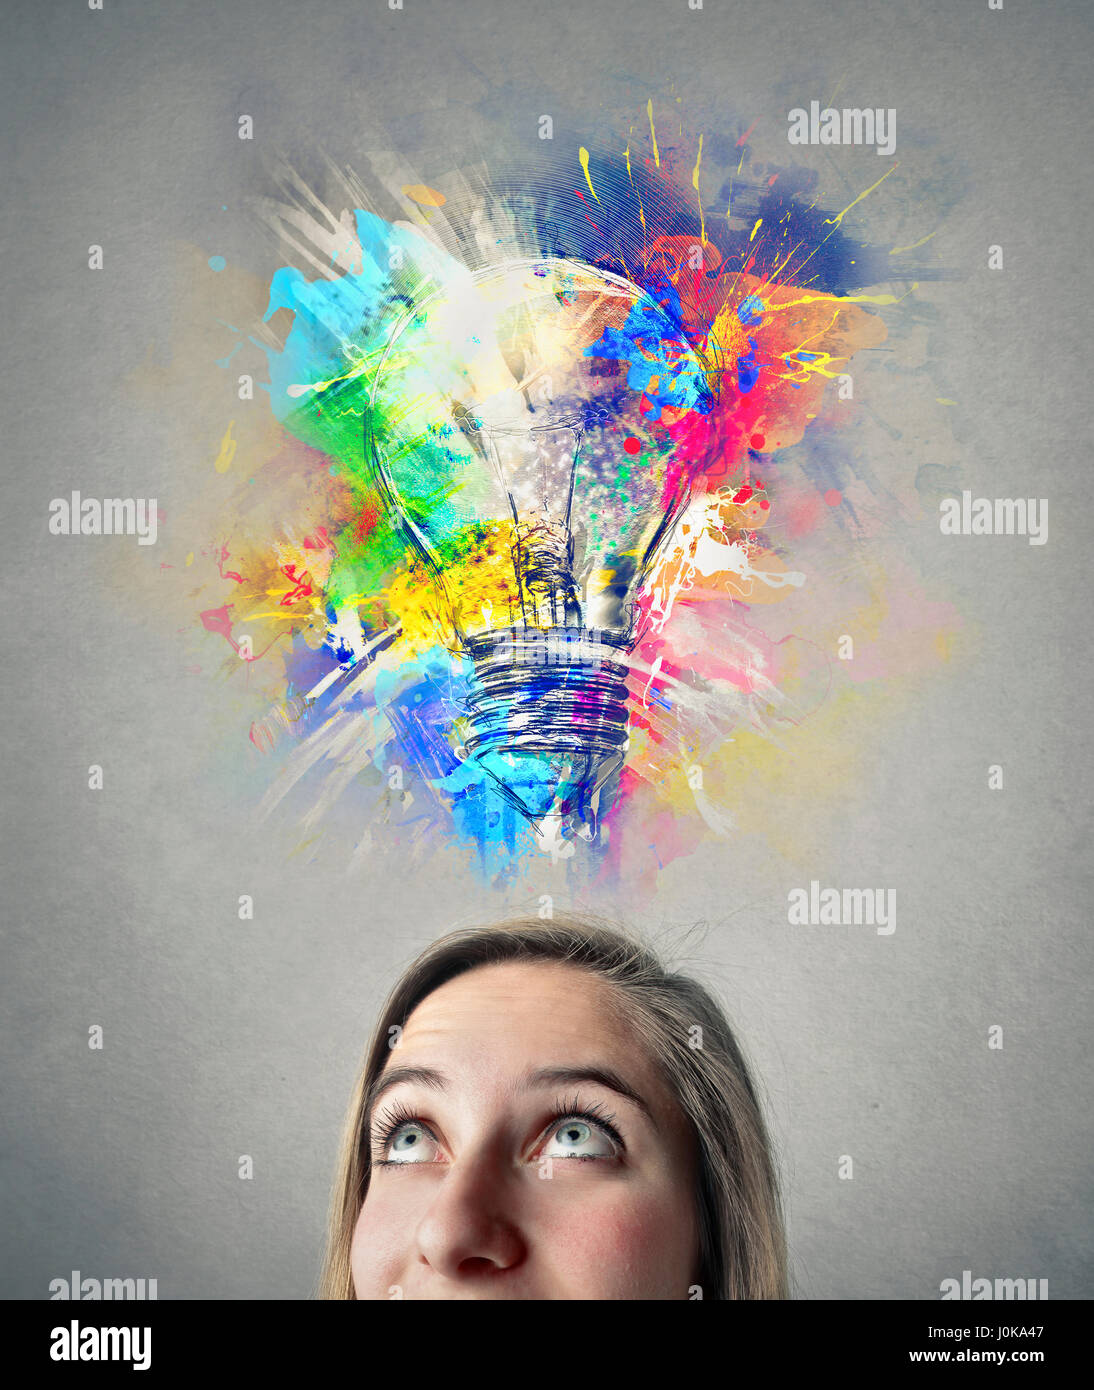 Woman with colorful plan Stock Photo